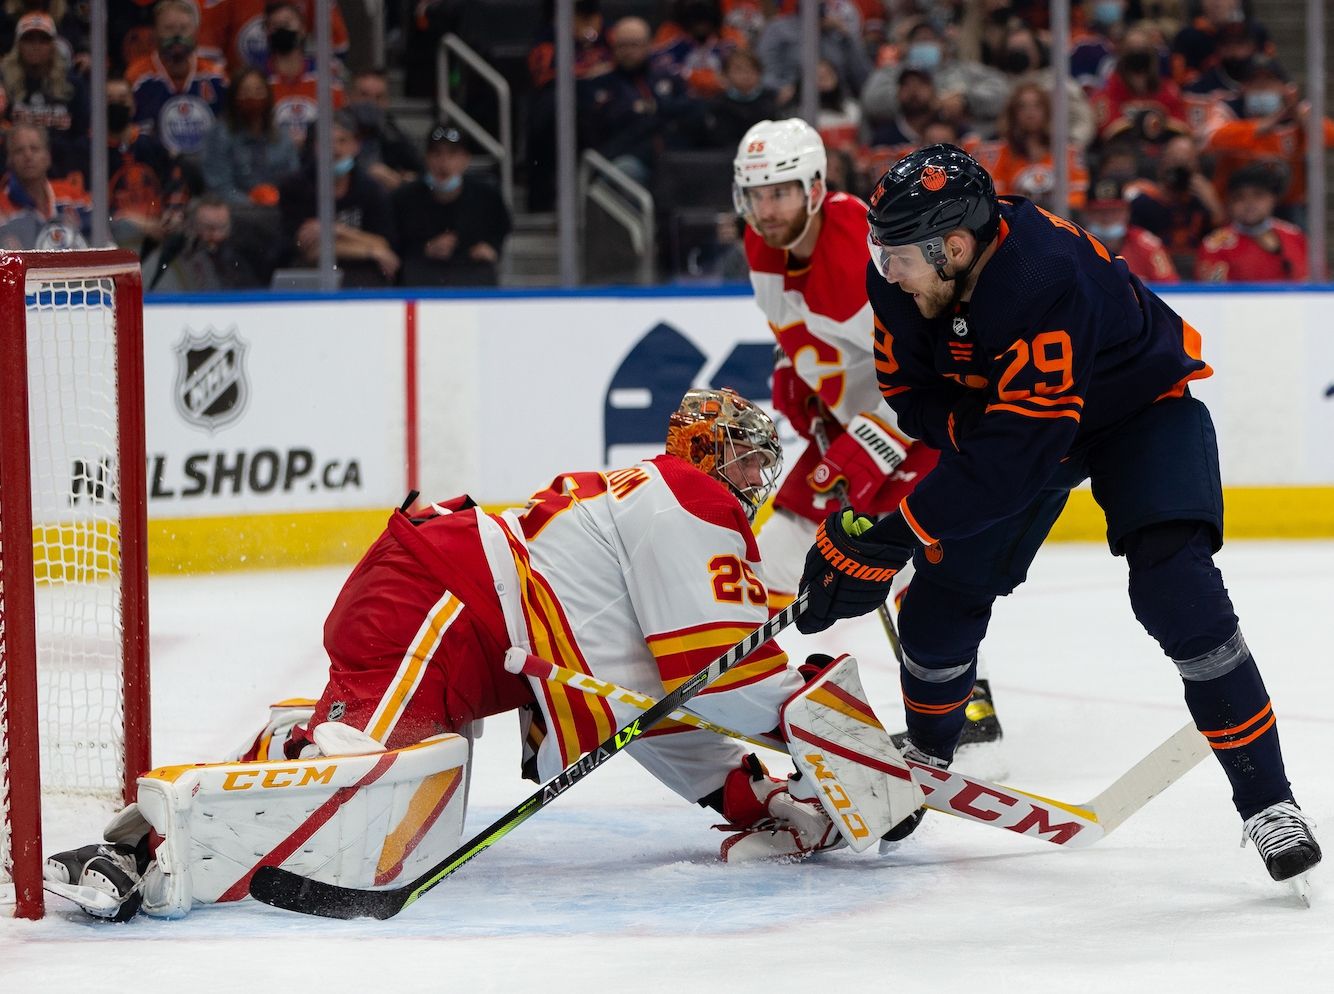 McDavid leads Oilers past Flames with hat trick, 5-point night